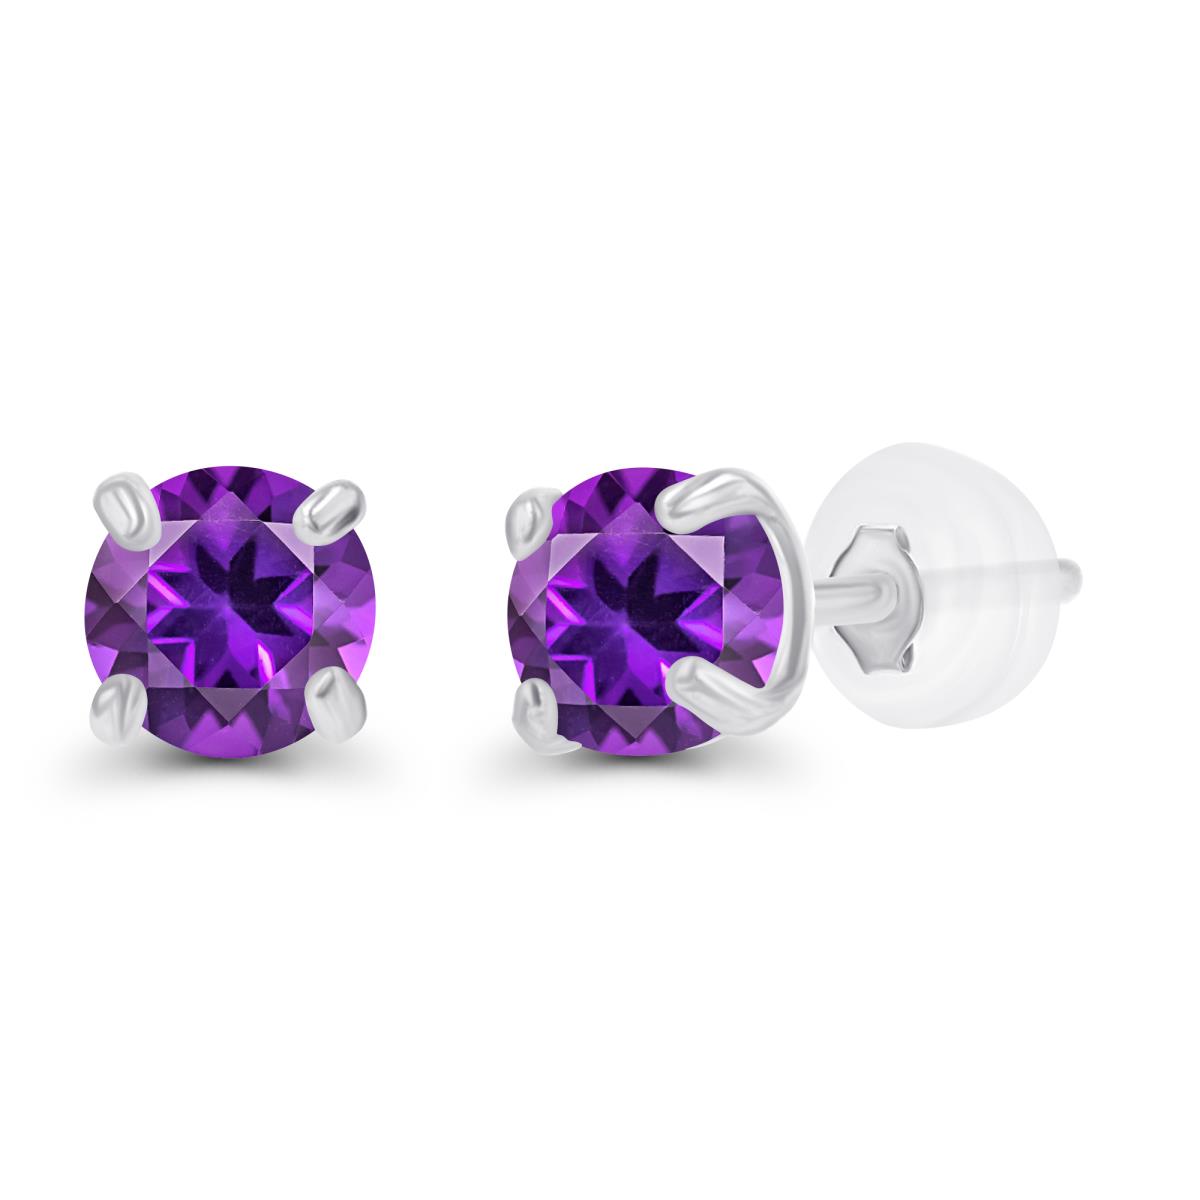 10K White Gold 3mm Round Amethyst Stud Earring with Silicone Back